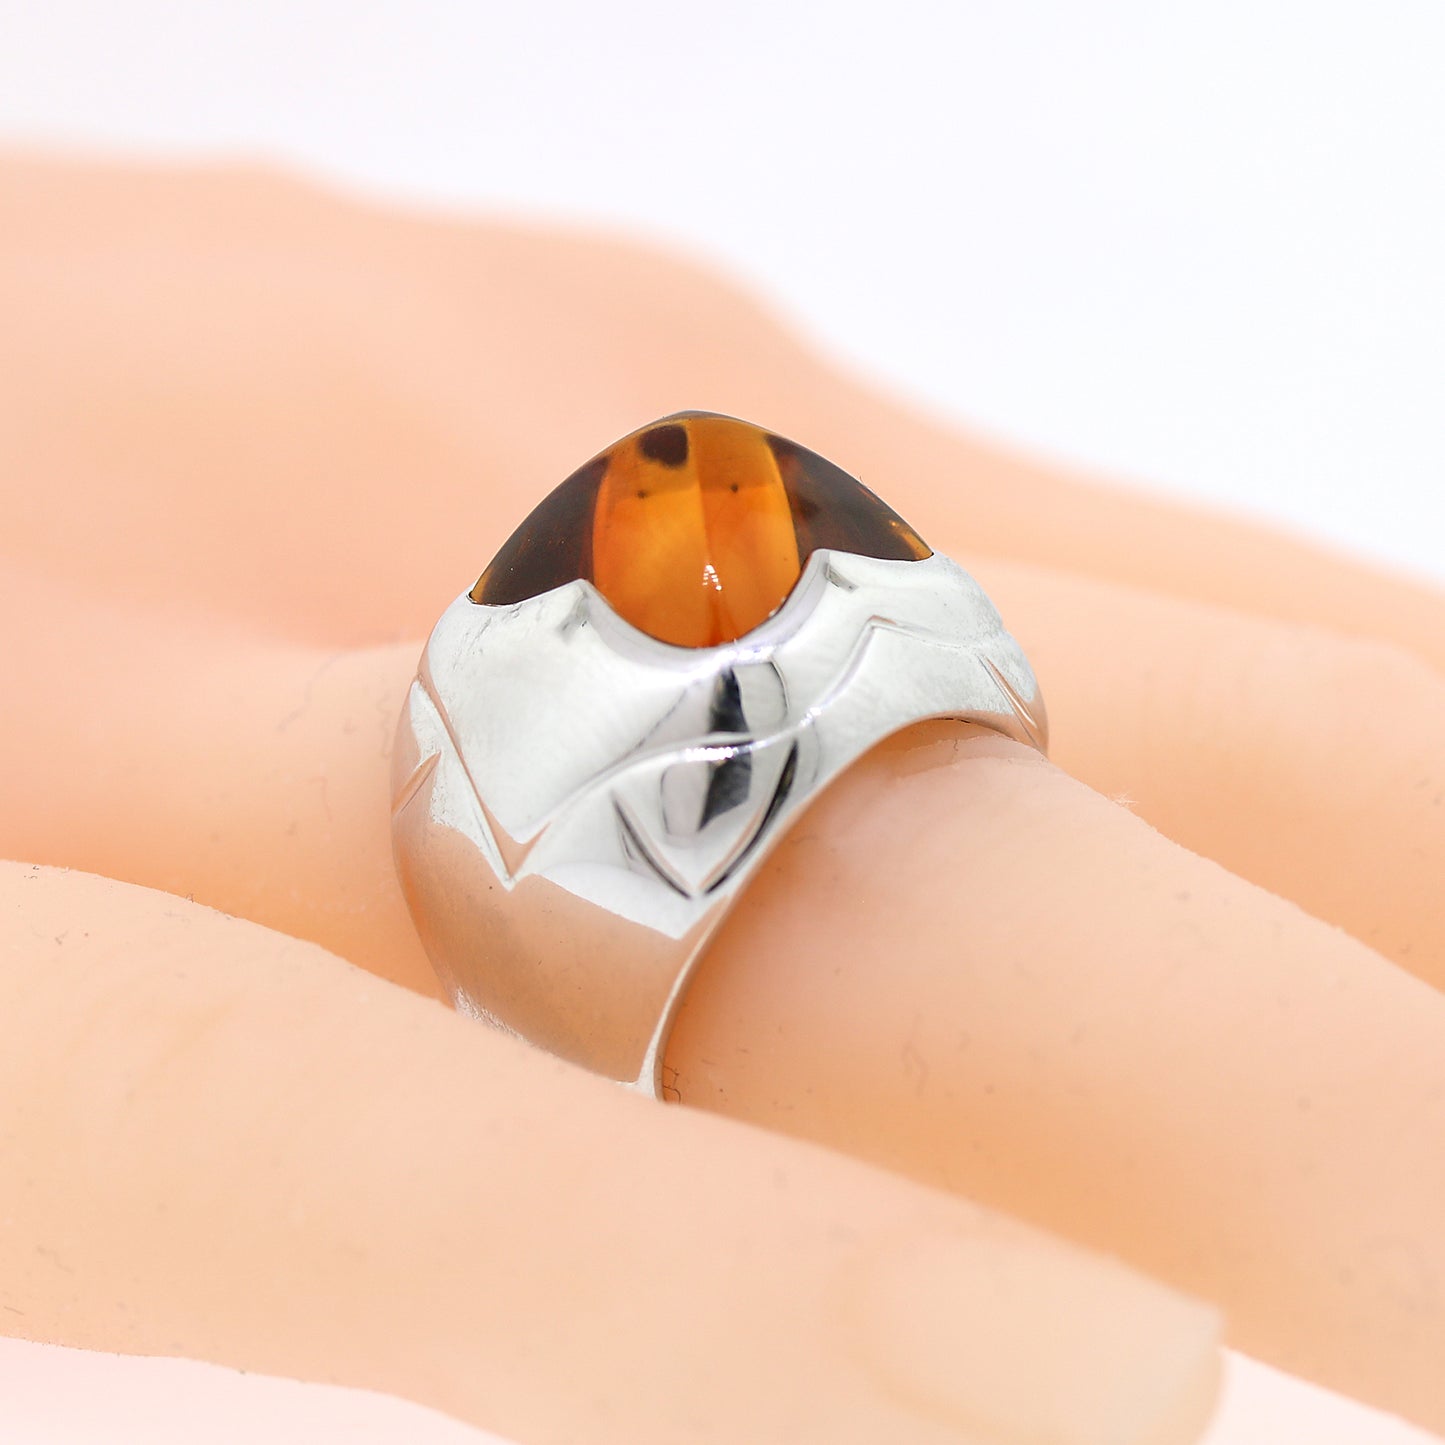 Load image into Gallery viewer, Bvlgari Citrine Pyramid Ring in 18k White Gold
